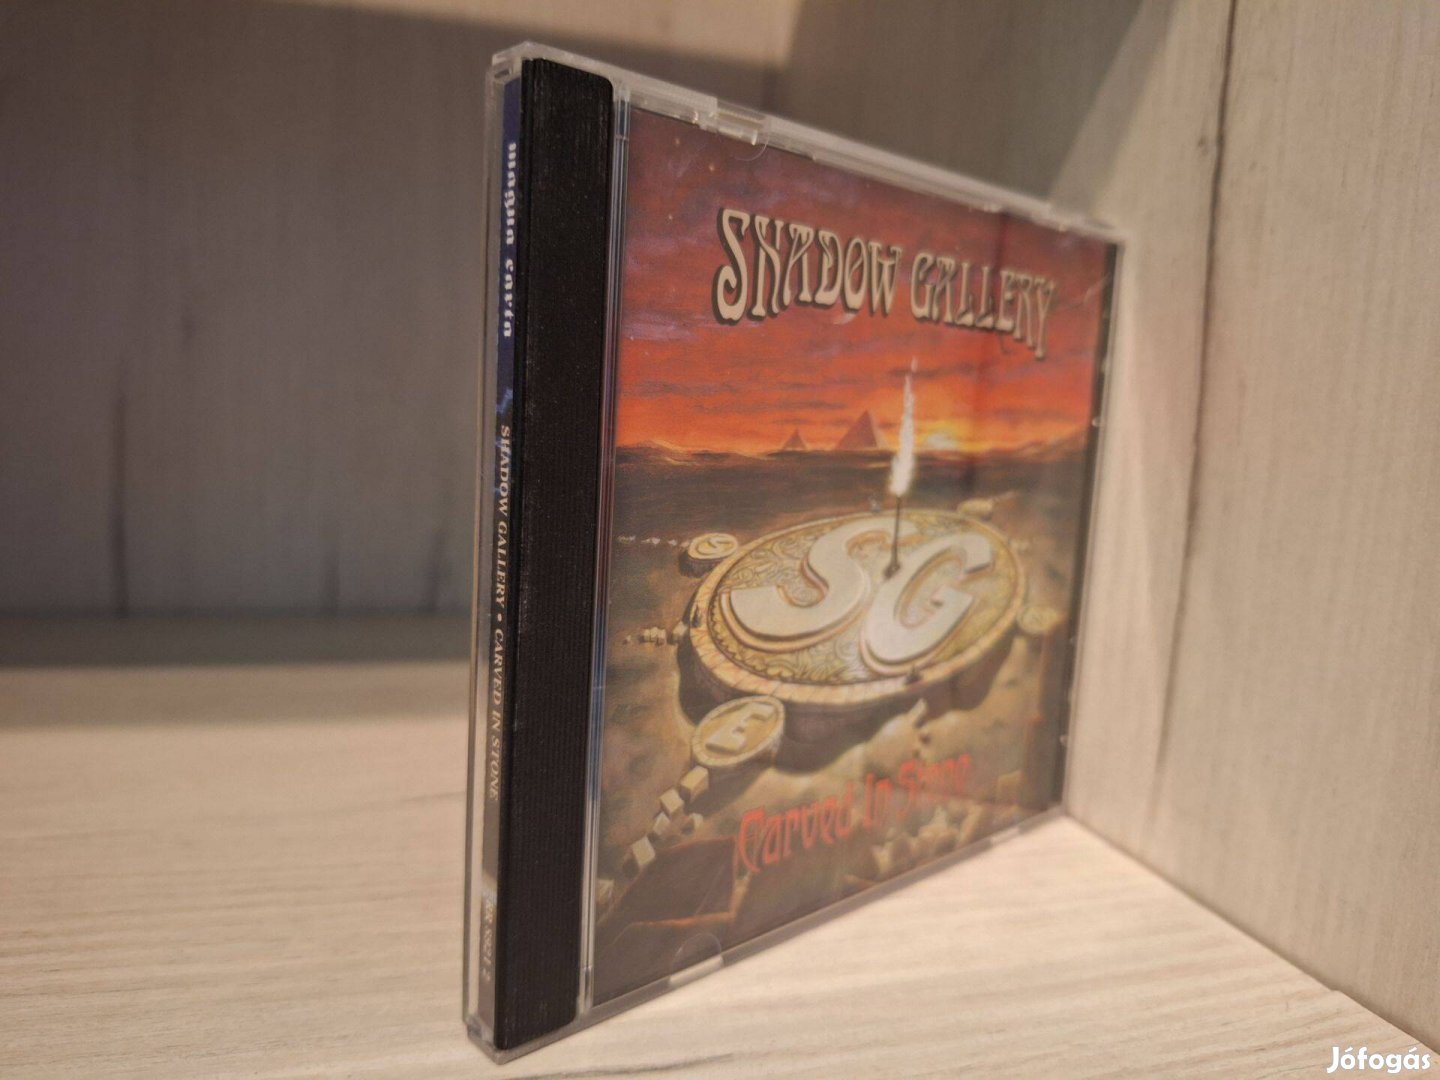 Shadow Gallery - Carved In Stone CD